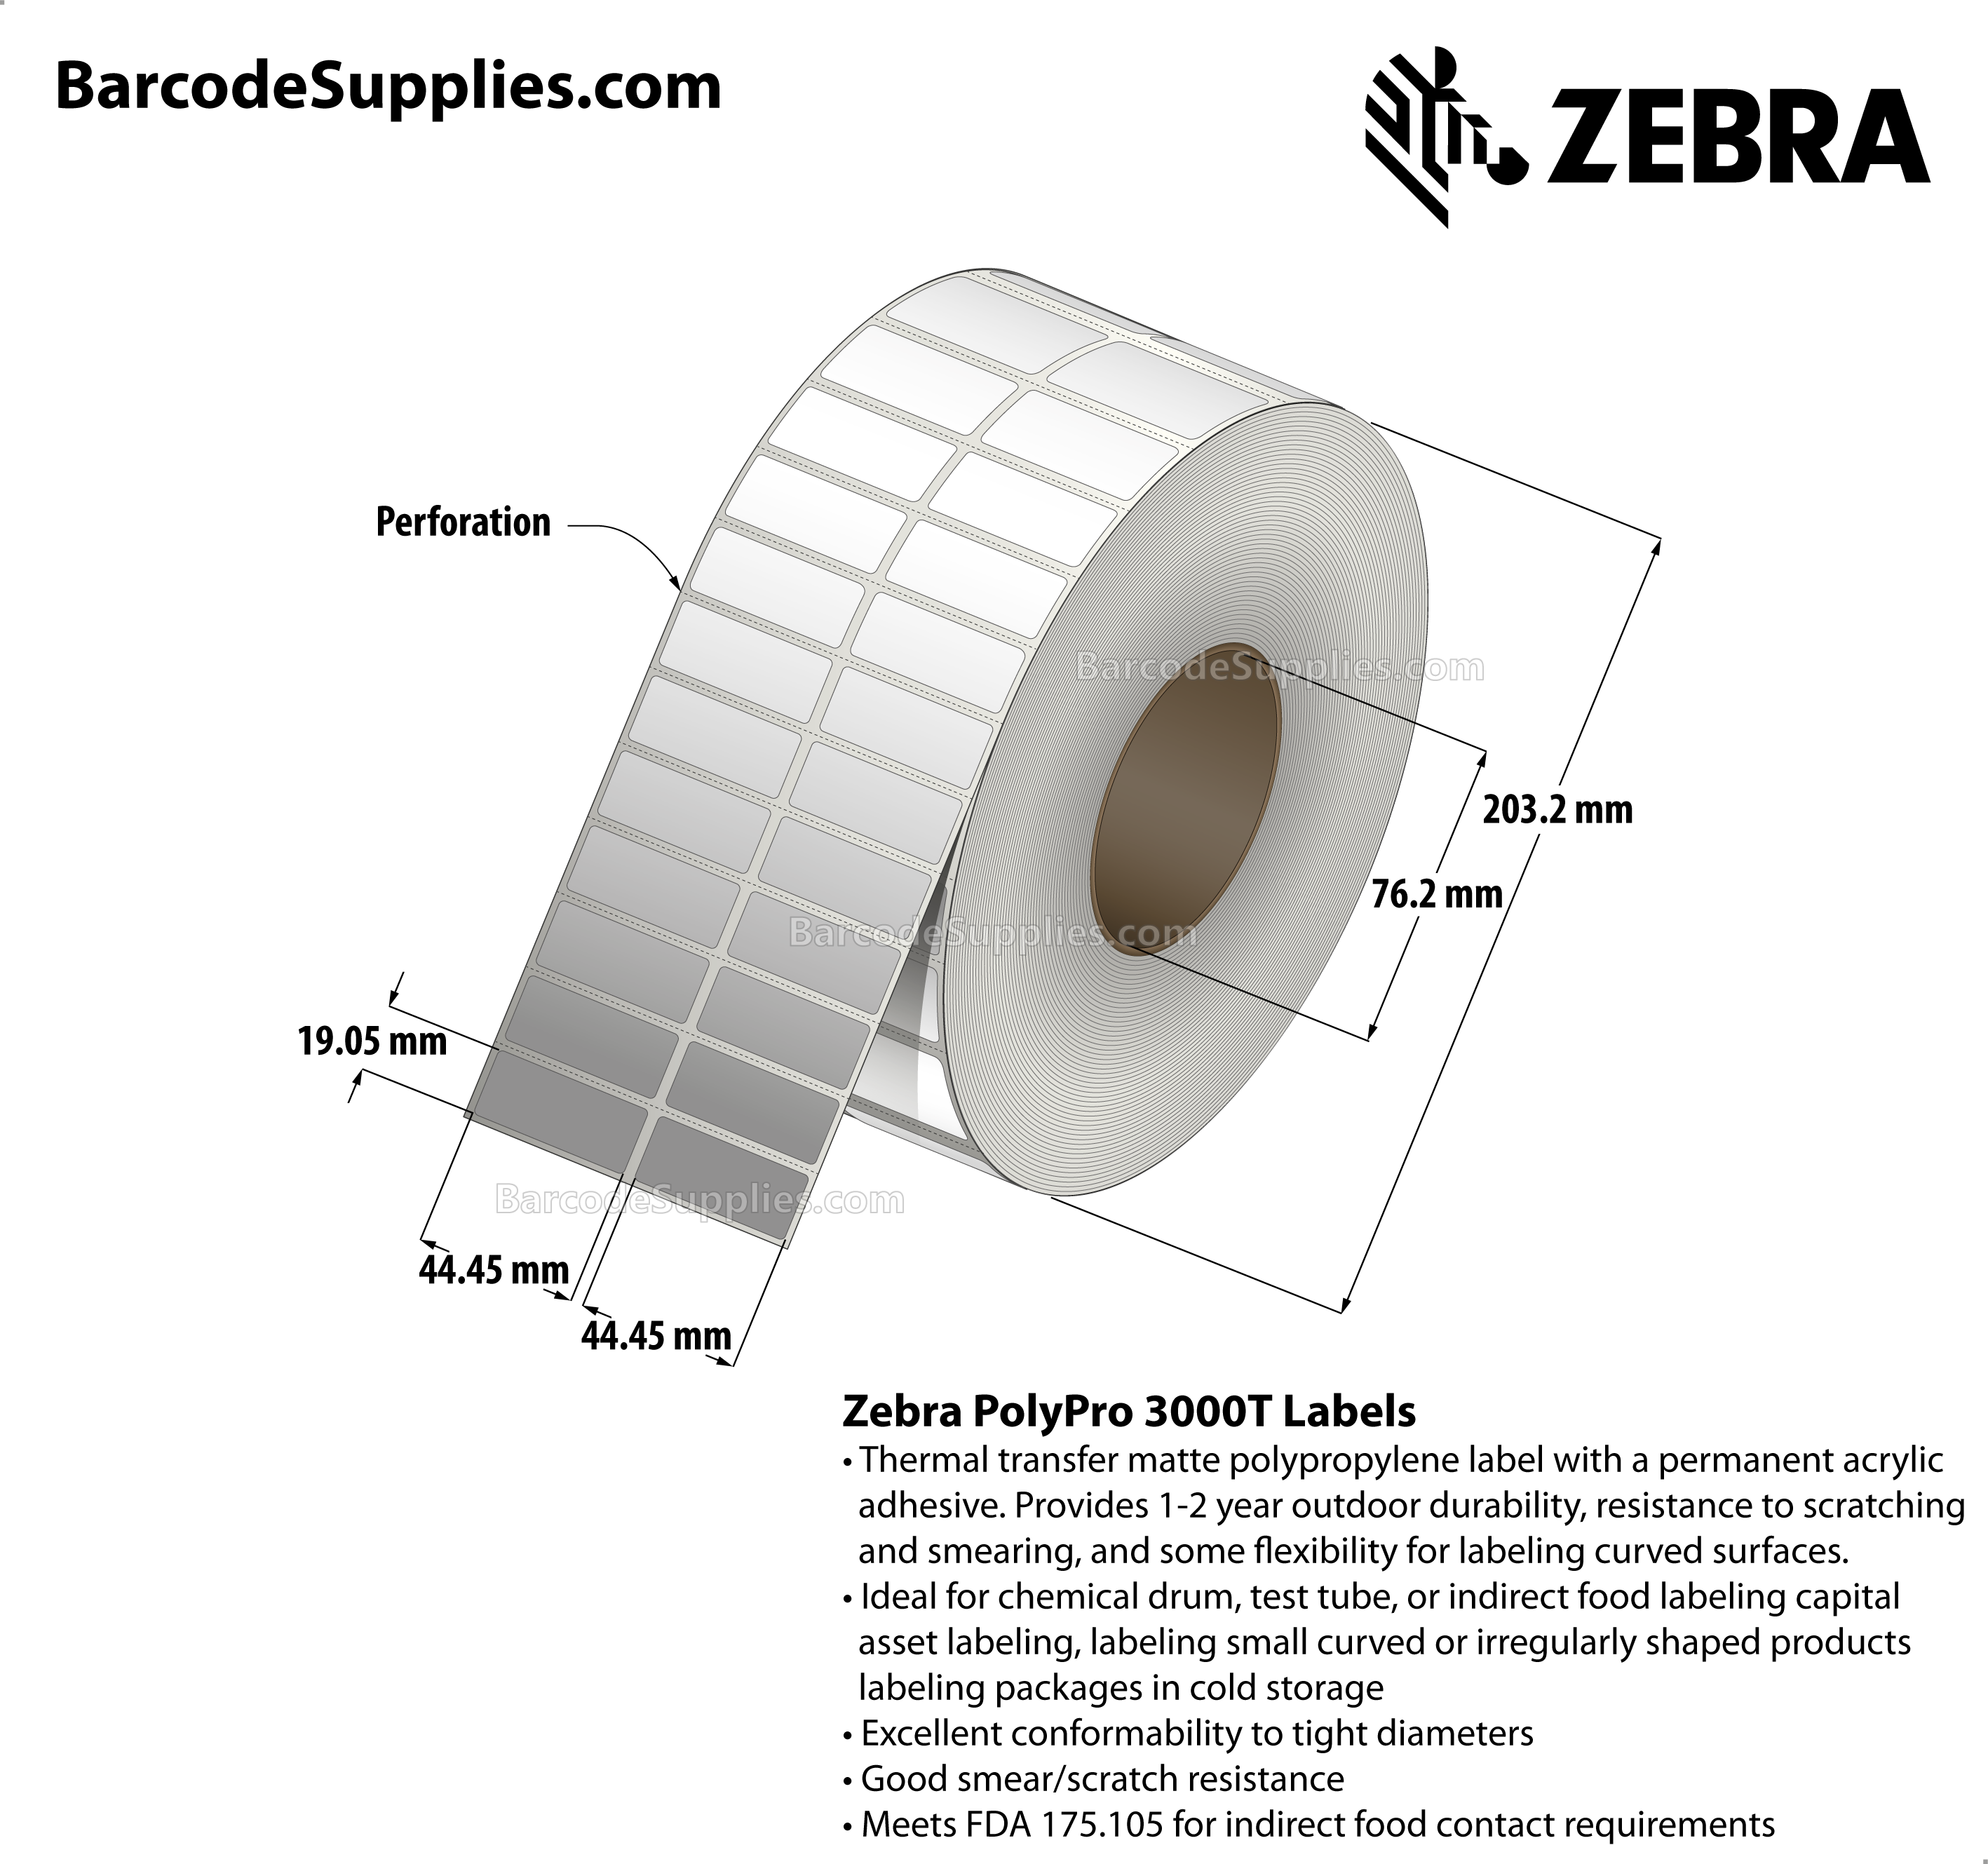 1.75 x 0.75 Thermal Transfer White PolyPro 3000T (2-Across) Labels With Permanent Adhesive - Perforated - 11888 Labels Per Roll - Carton Of 4 Rolls - 47552 Labels Total - MPN: 10011988